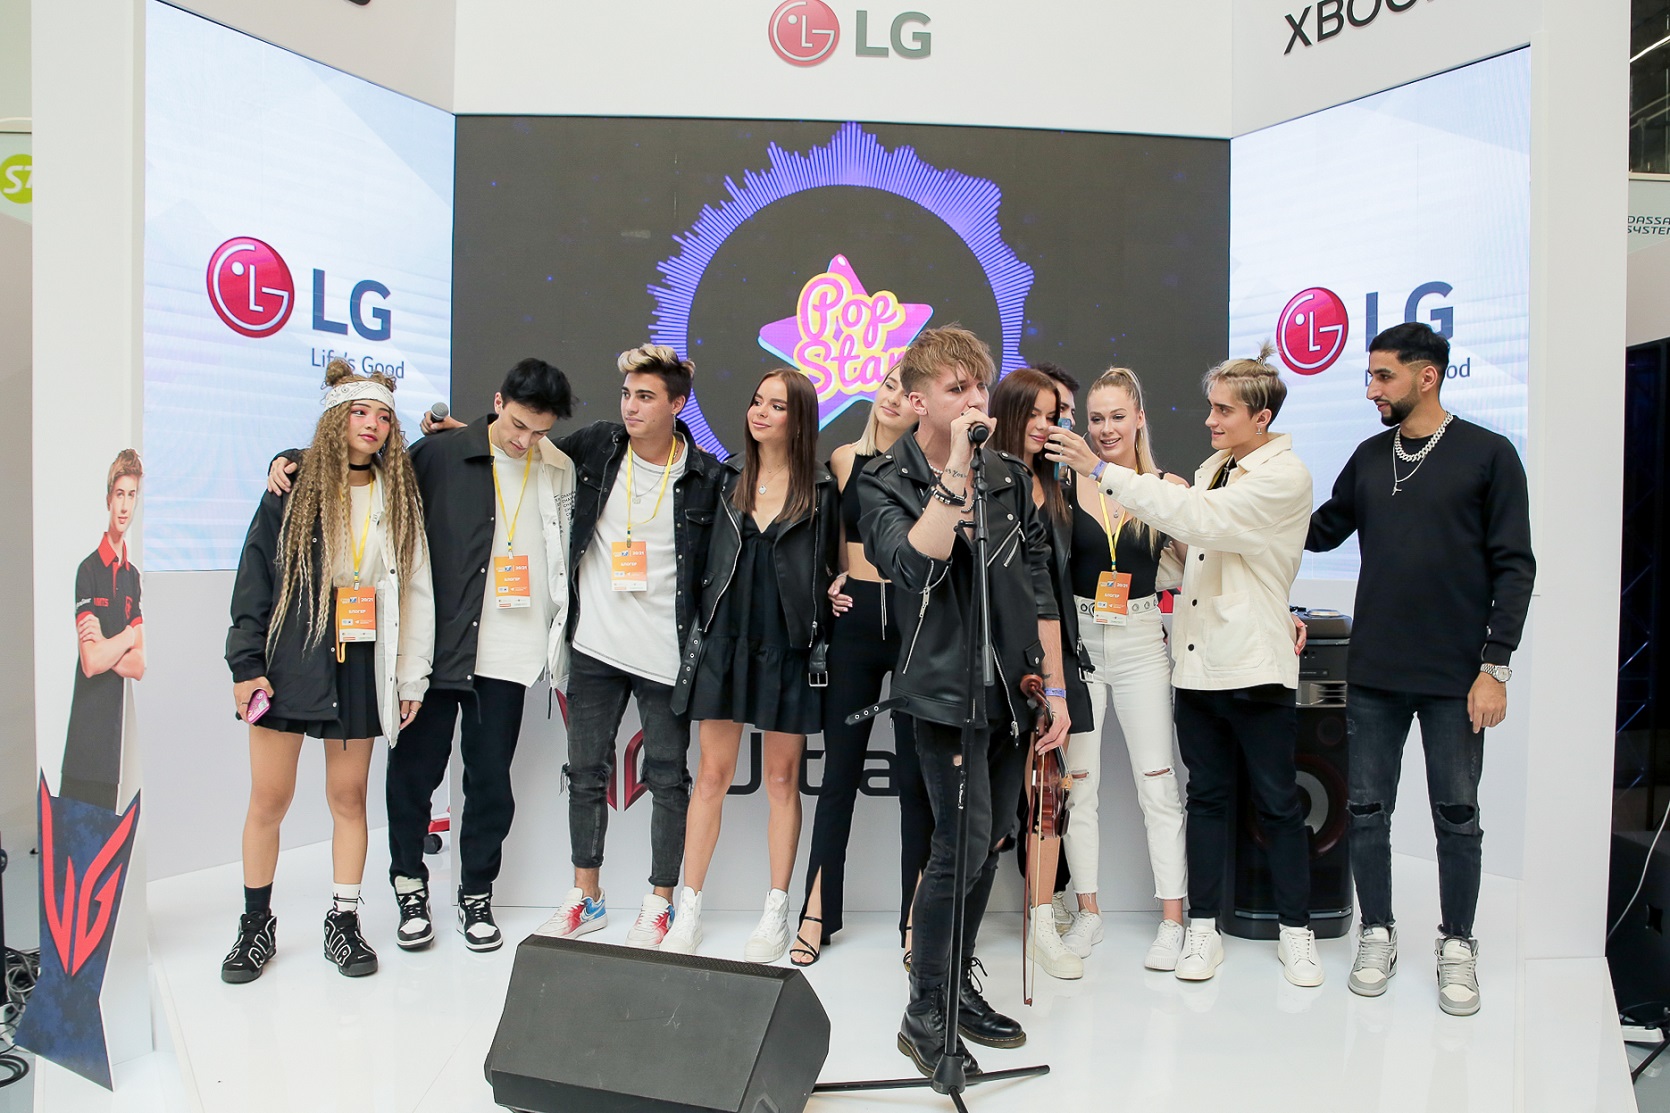 Artists from the TikTok POP Star House performing at the LG Electronics booth during Streamfest 2021.